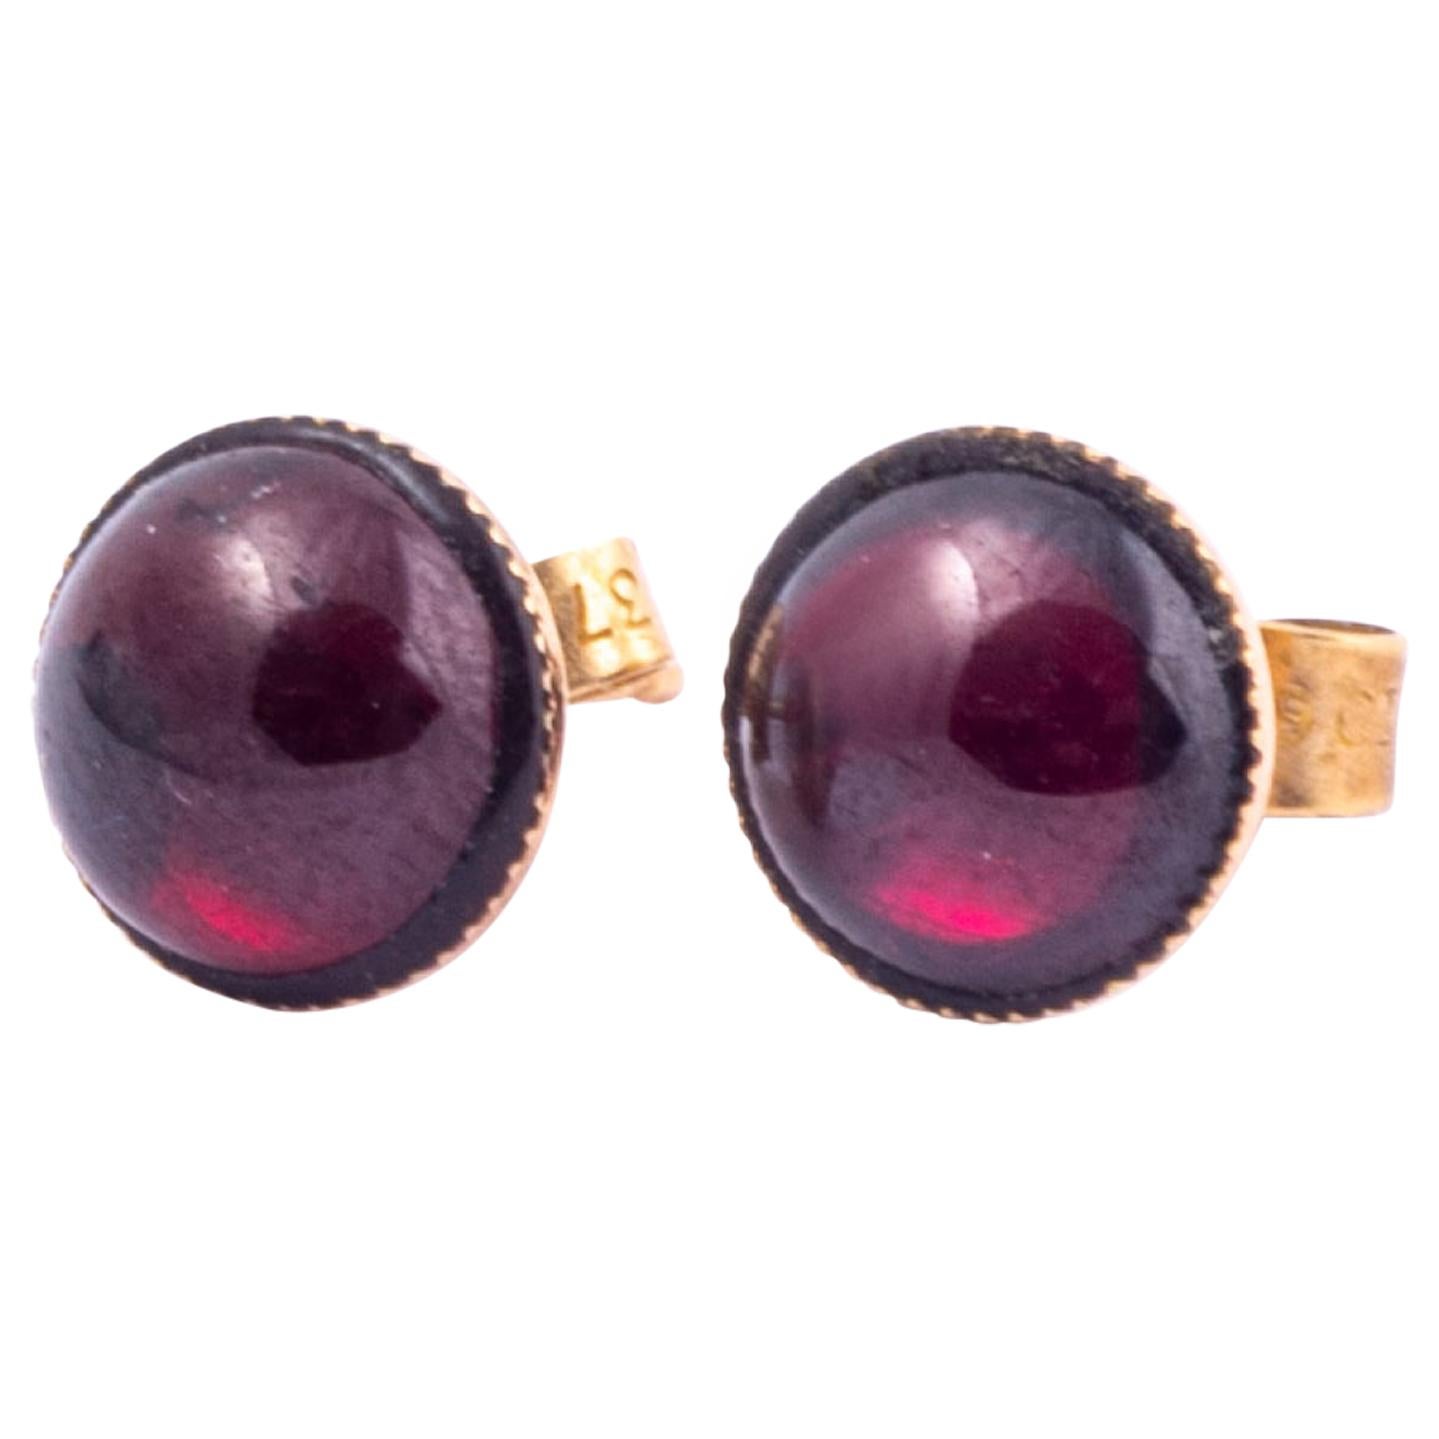 Antique Garnet Cabochon and 9 Carat Gold Stud Earrings